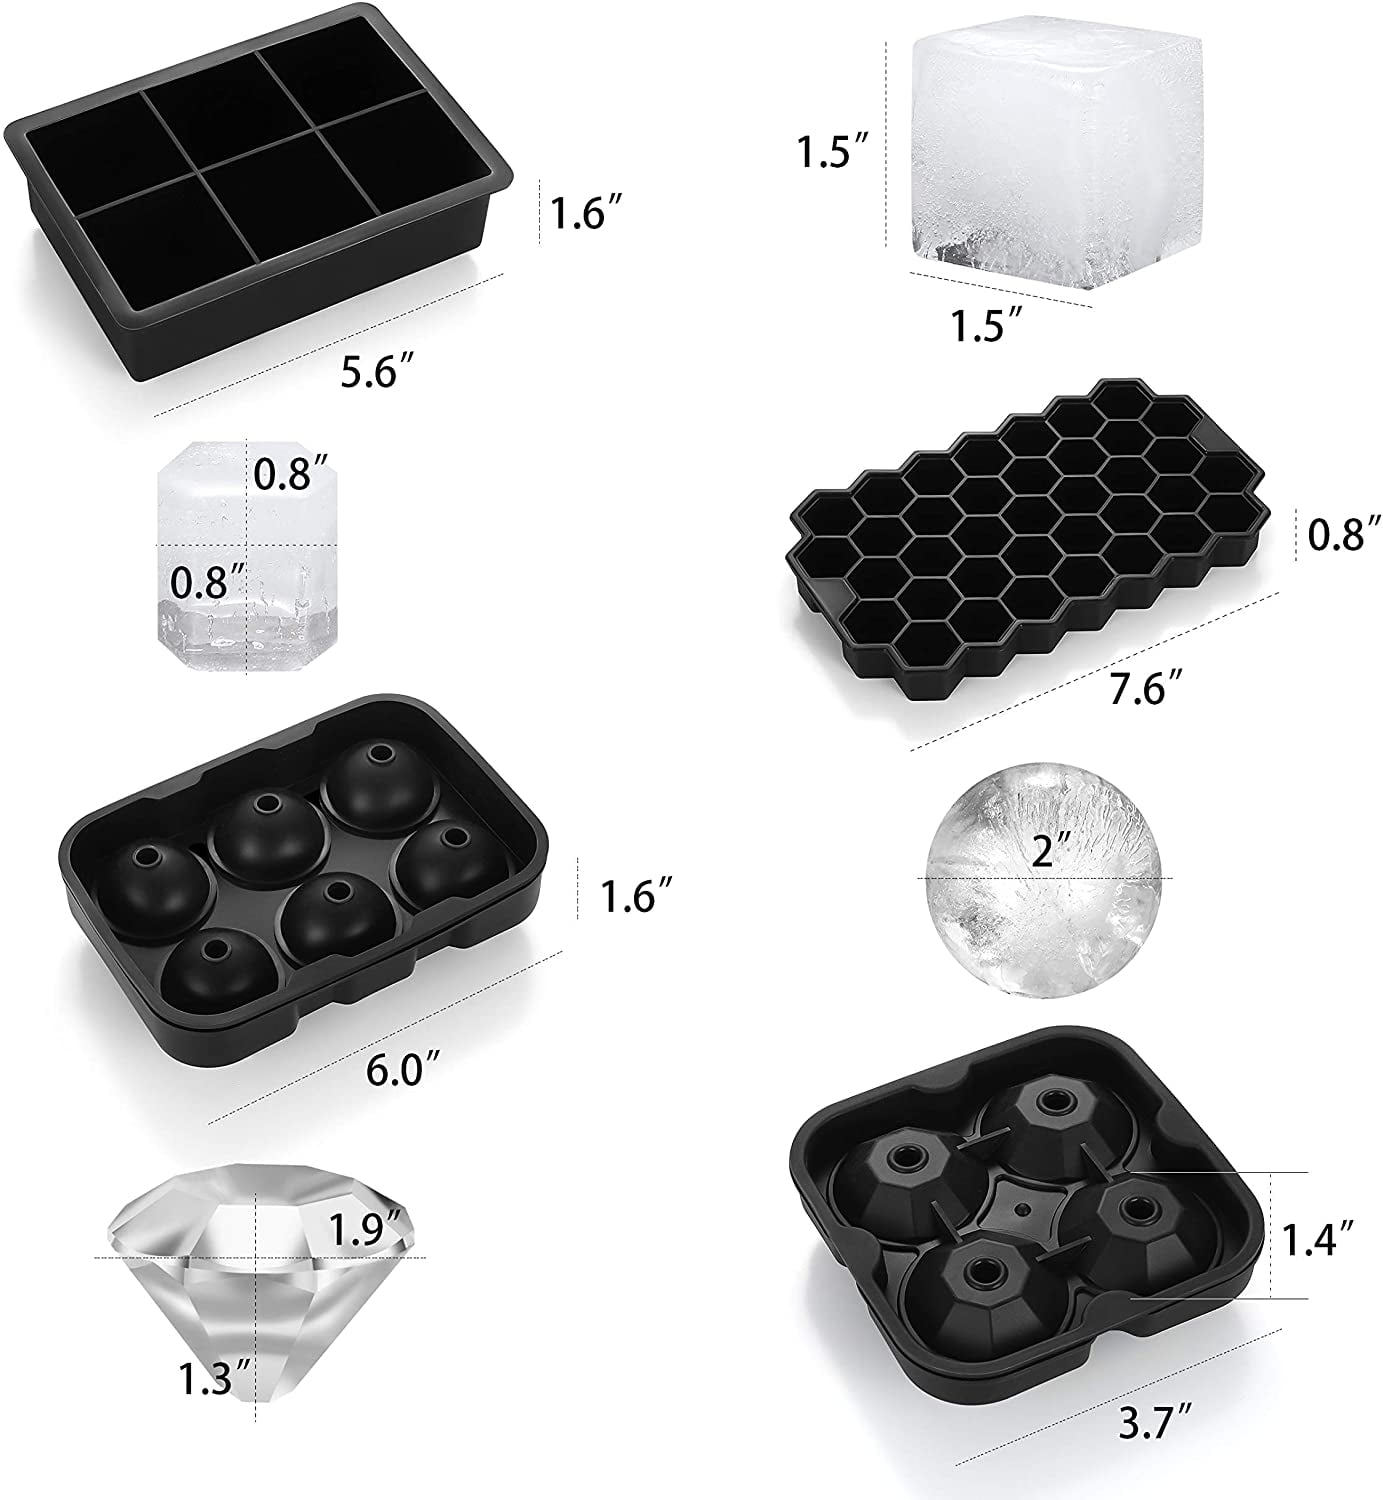 Sublimation Tools Diamond Shaped Custom Ice Cube Tray Mould With Lid And  Bin 14 36 37 Cube Whisky Inventory Wholesale From Smyy5, $9.73